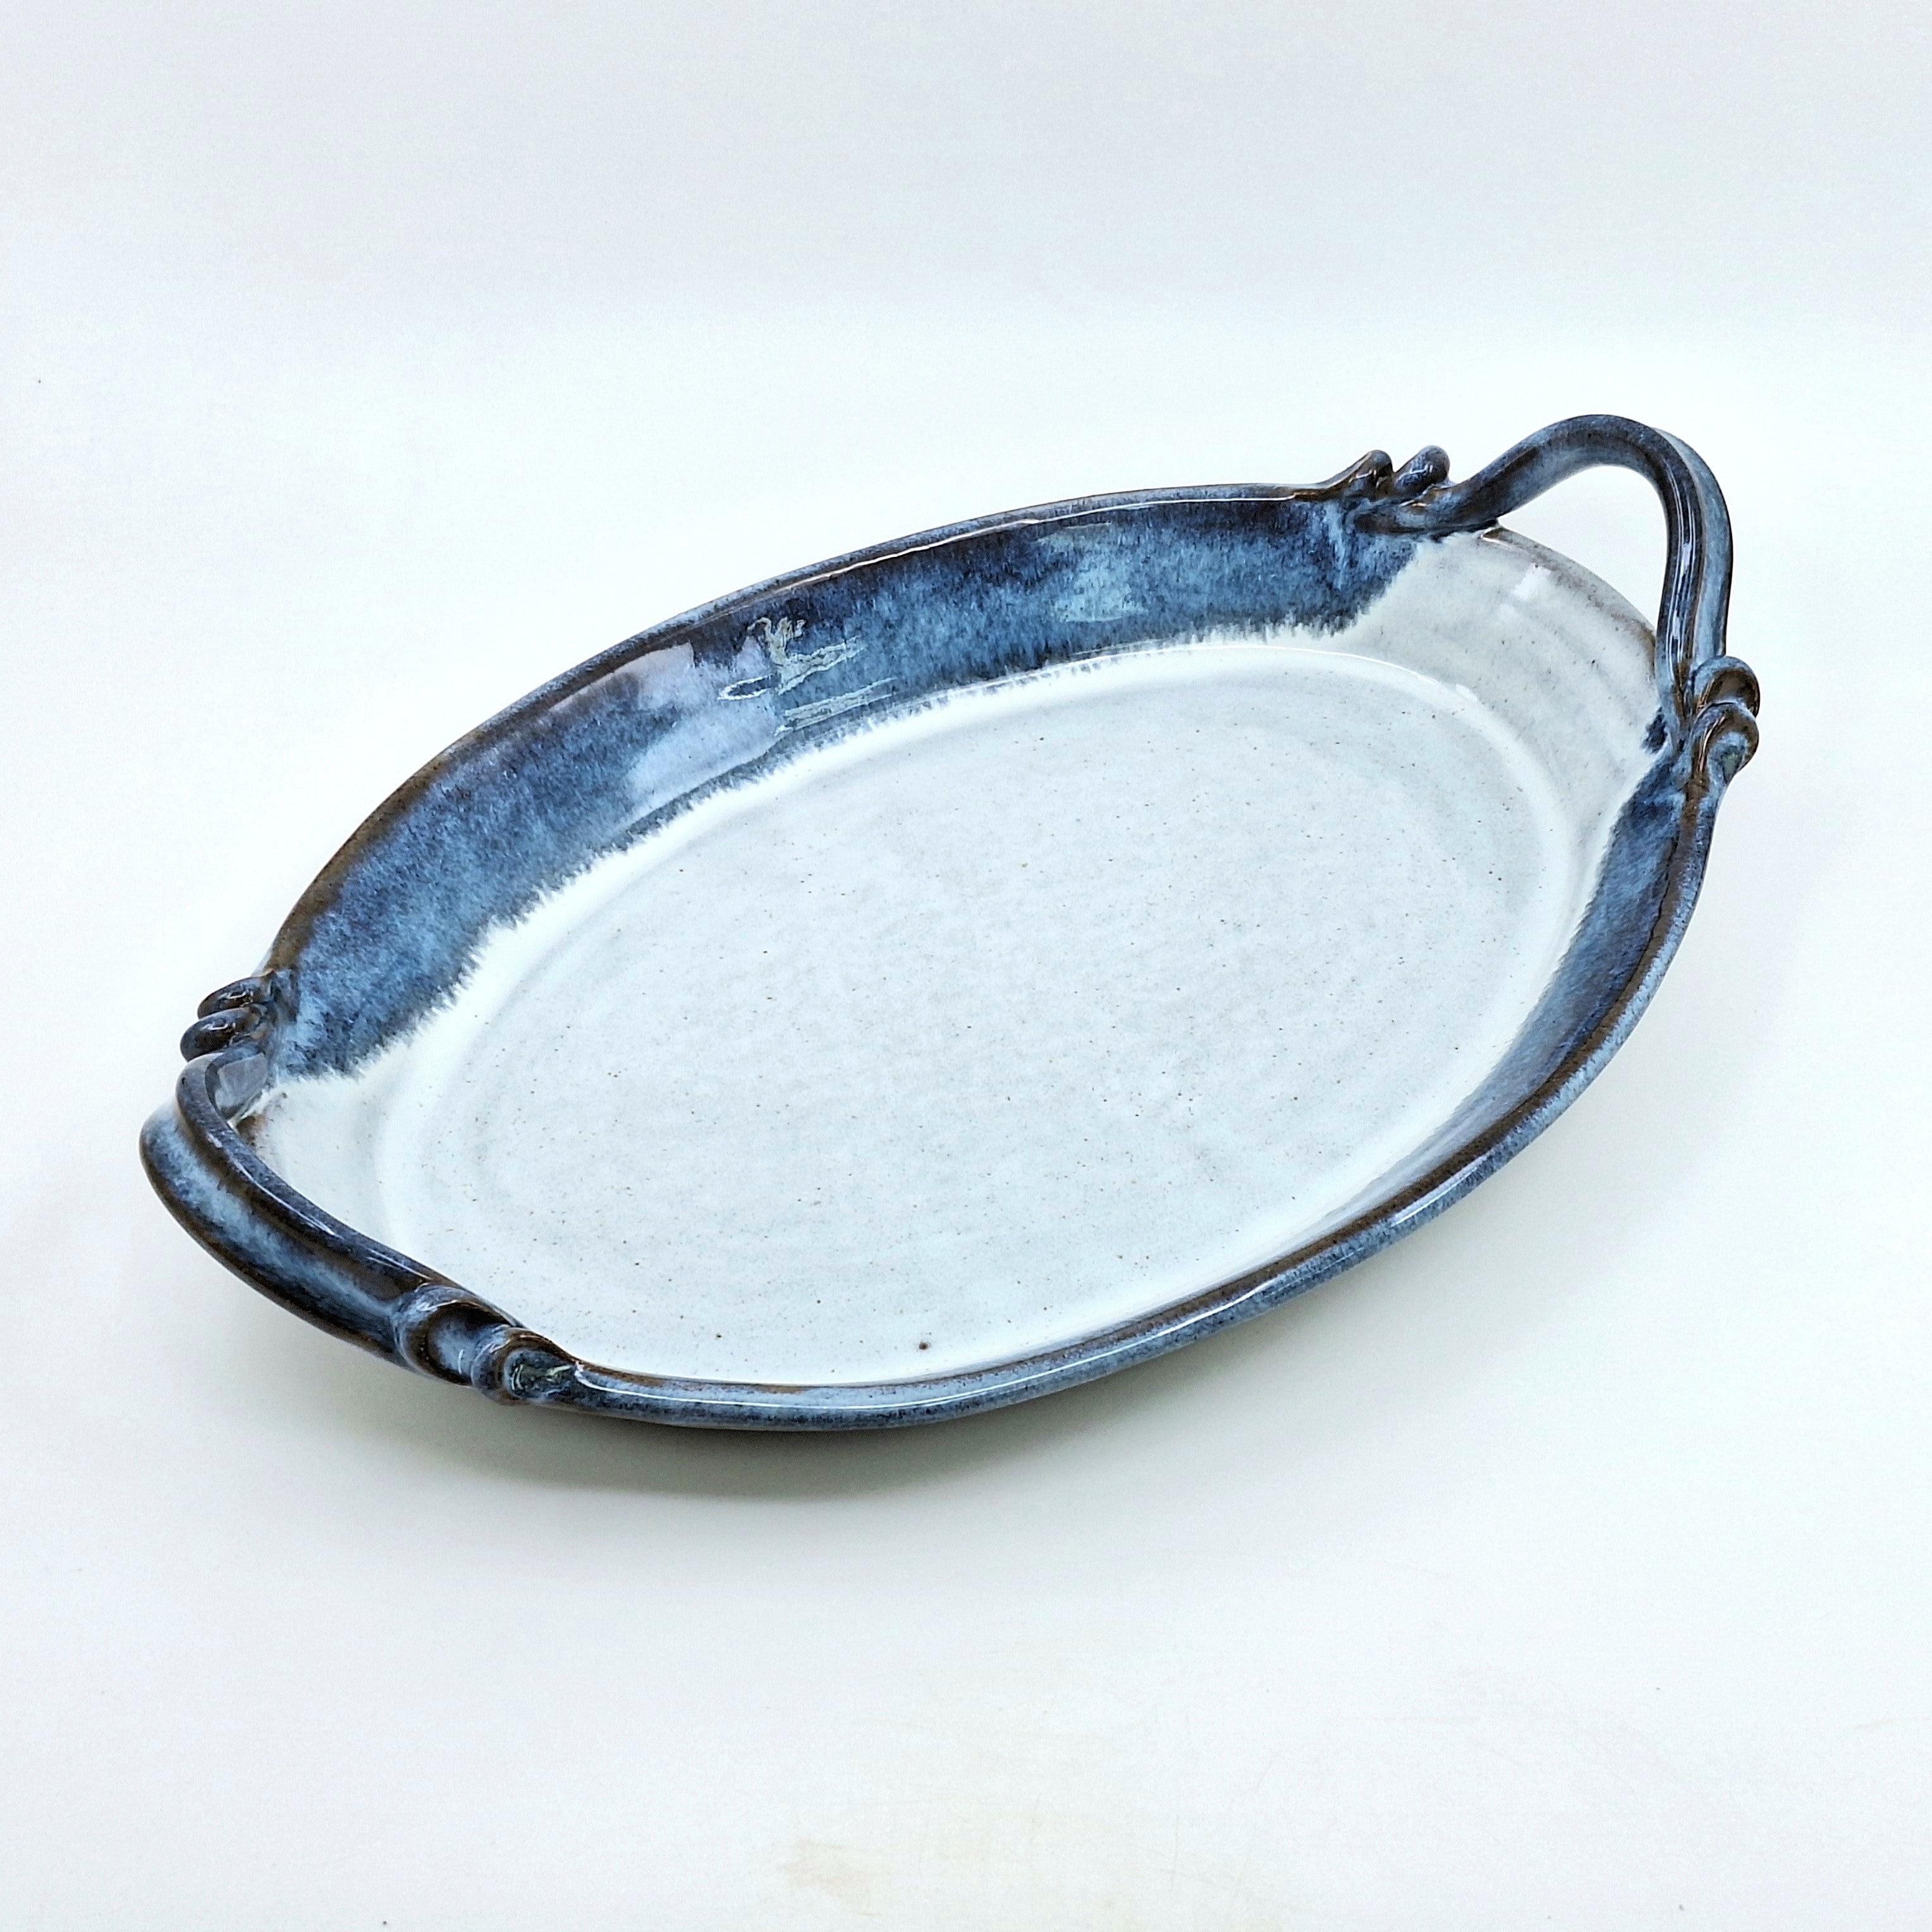 Serving Tray, Oval